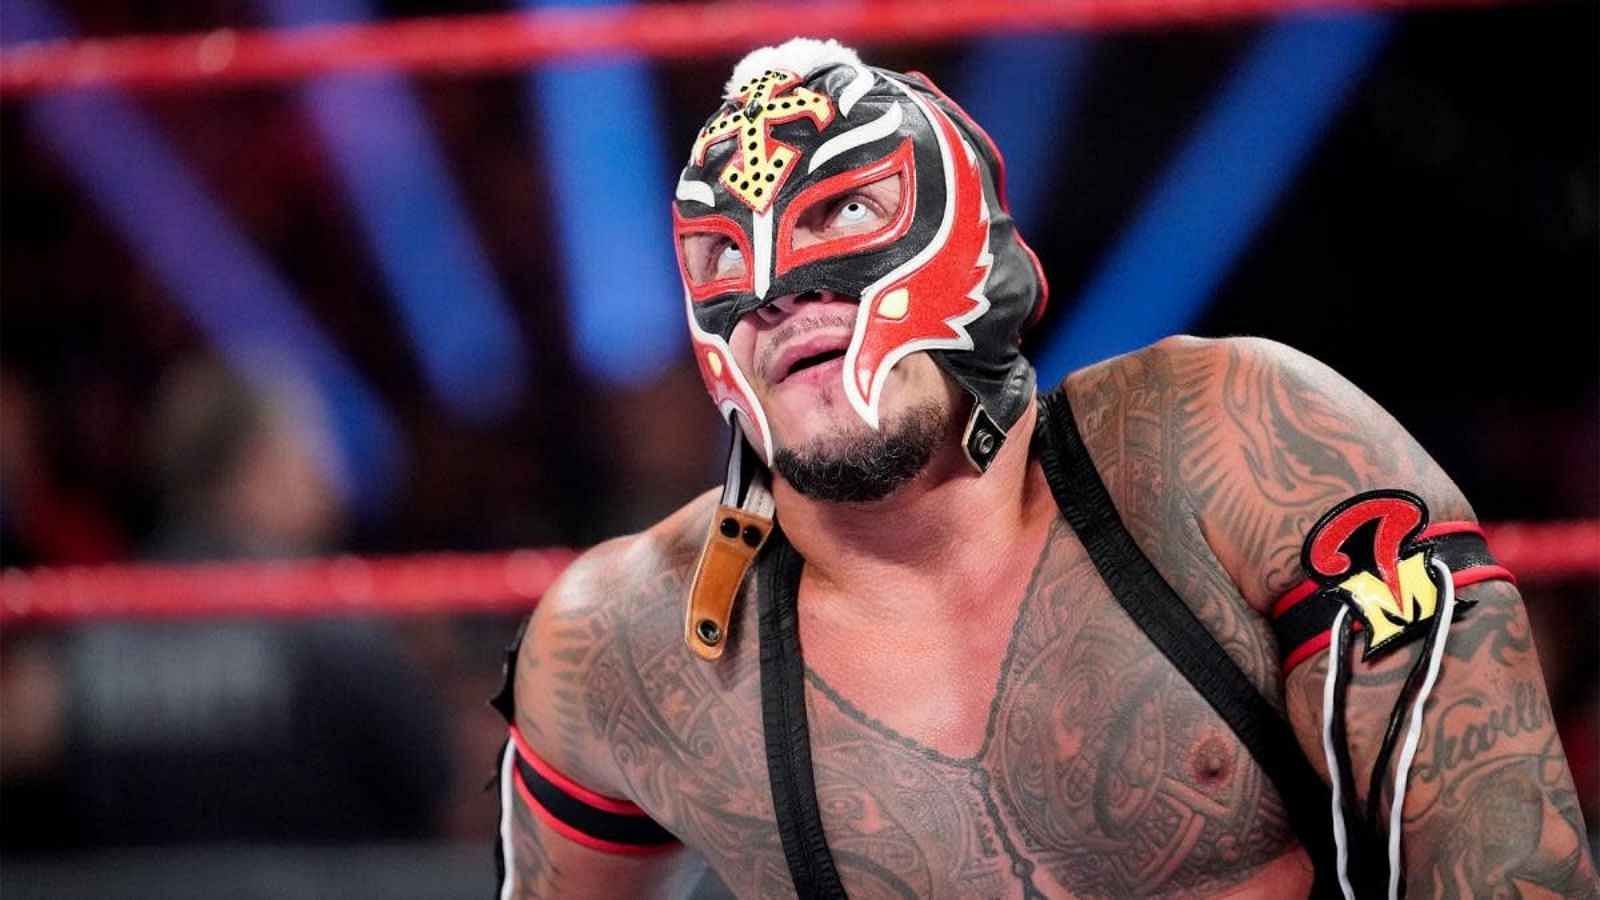 Rey Mysterio is a Grand Slam champion in WWE